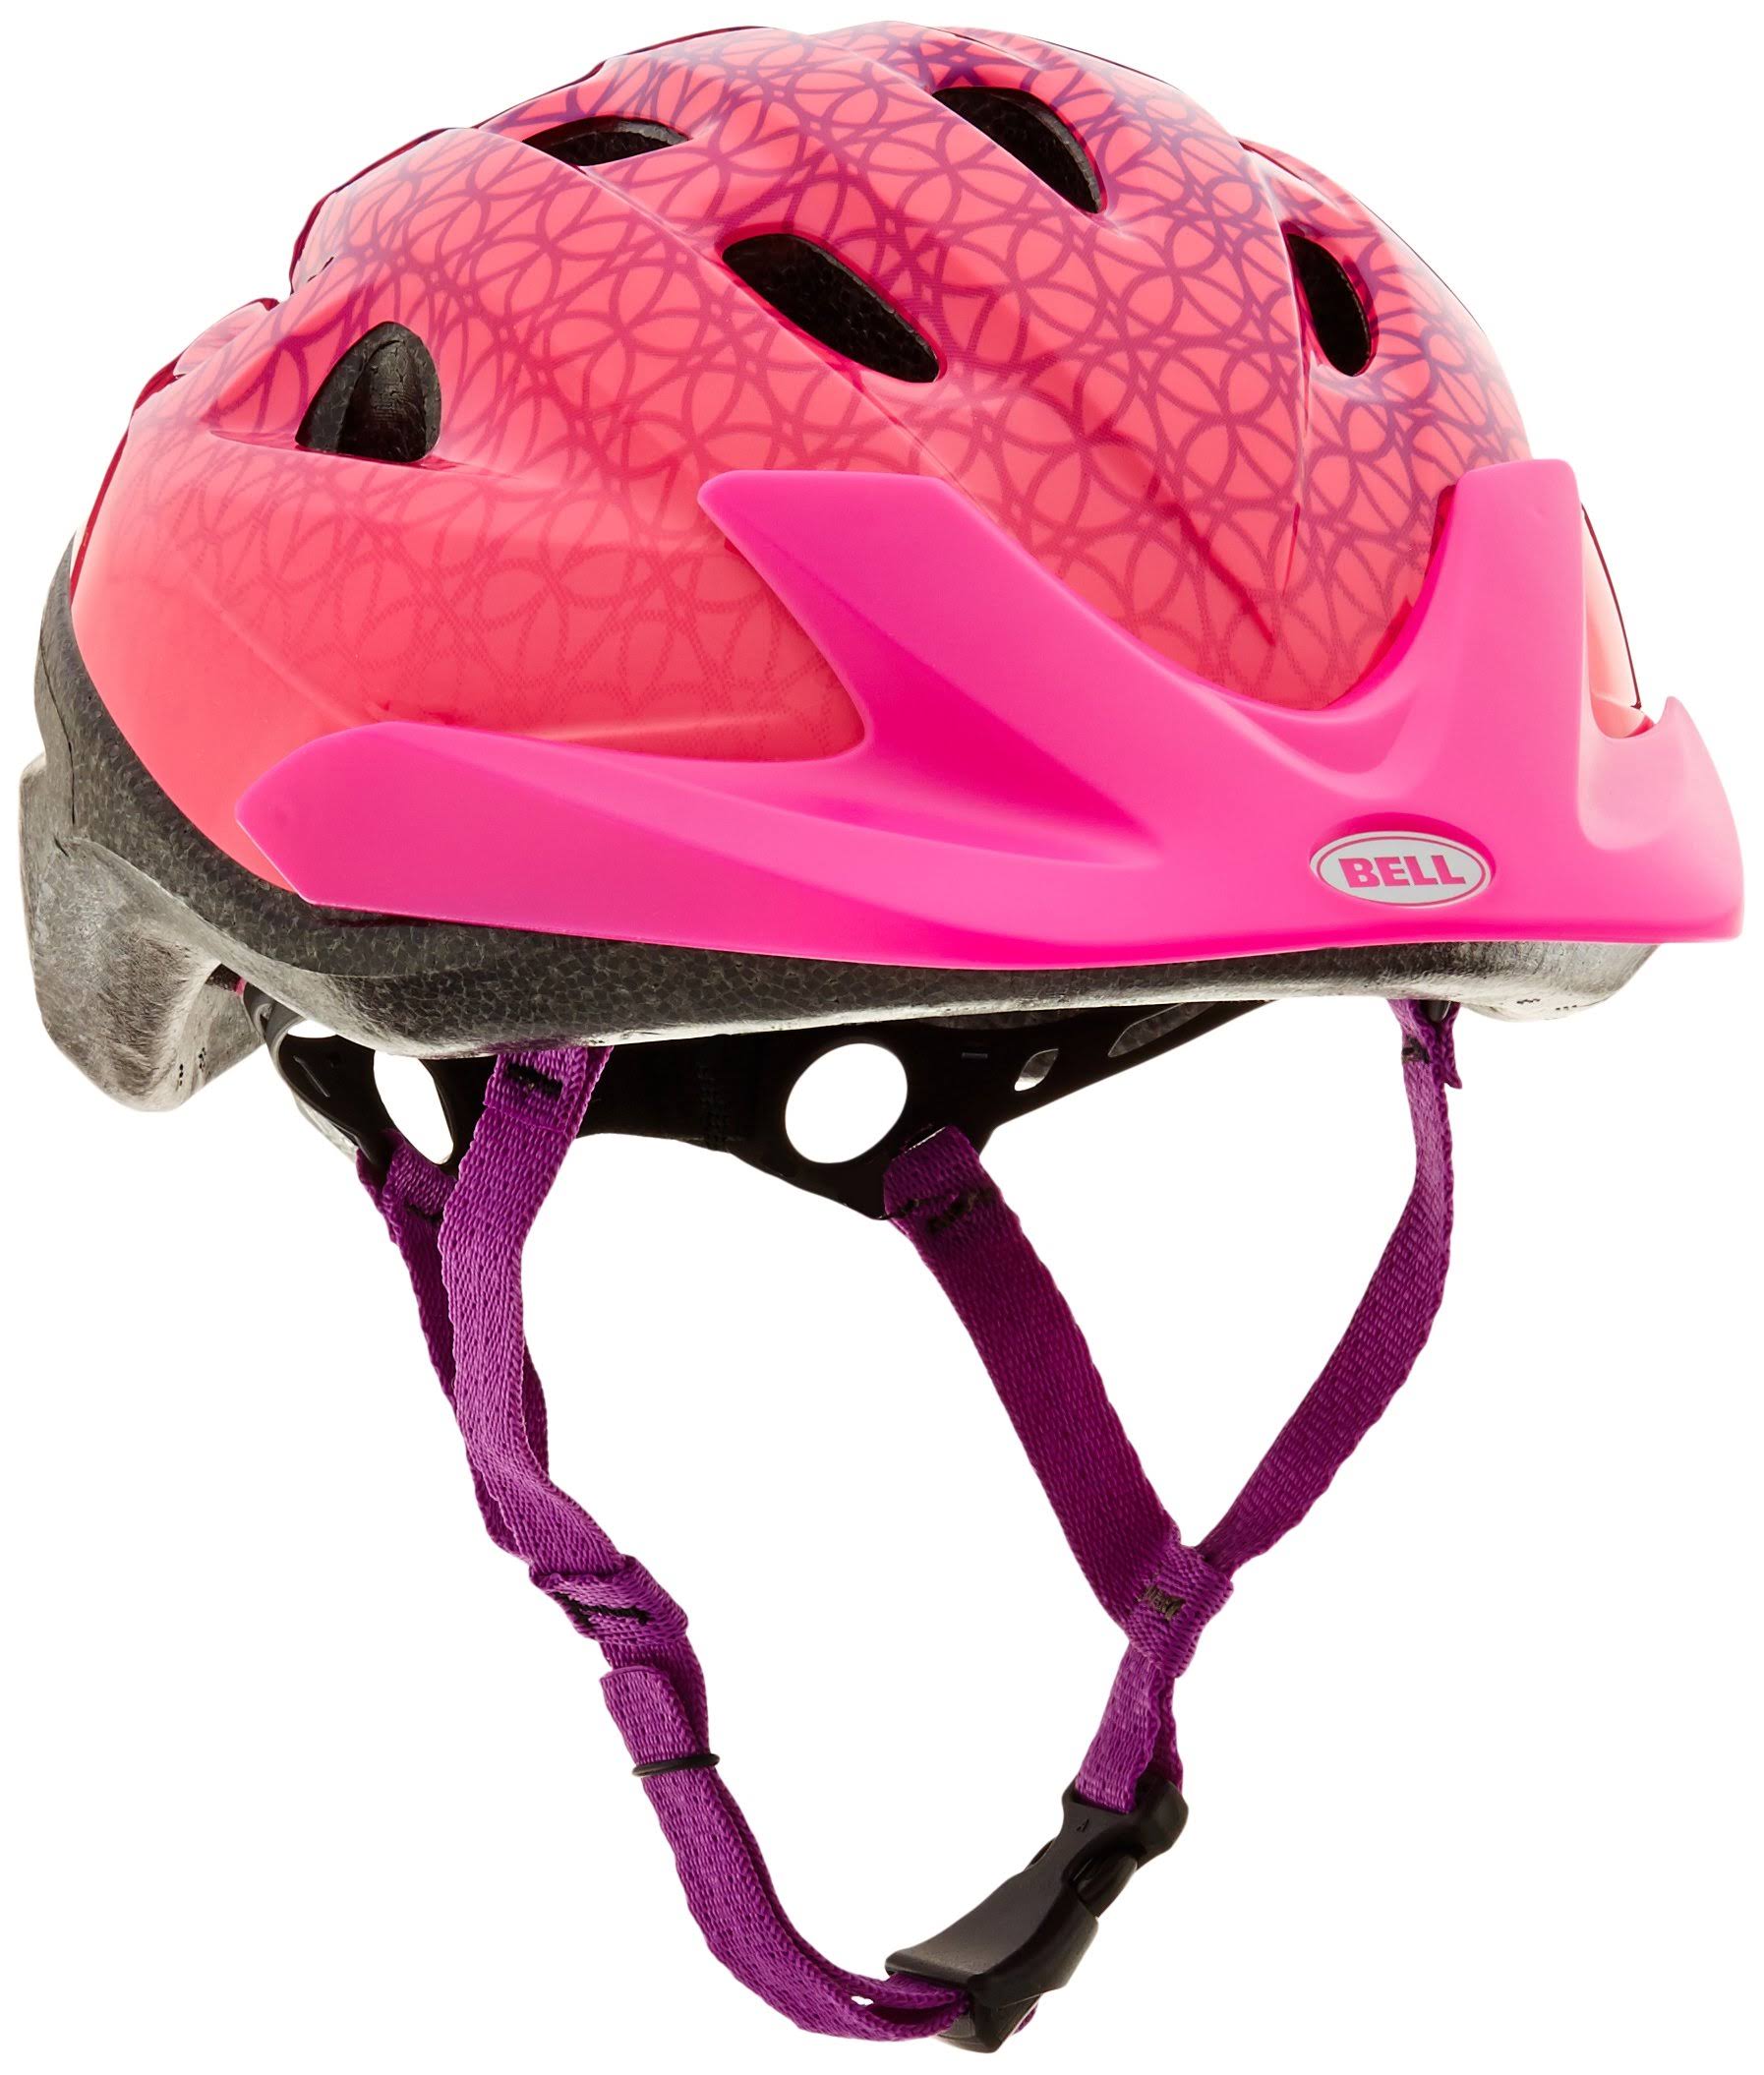 Bell Sports Girls' Rally Bicycle Helmet - Pink